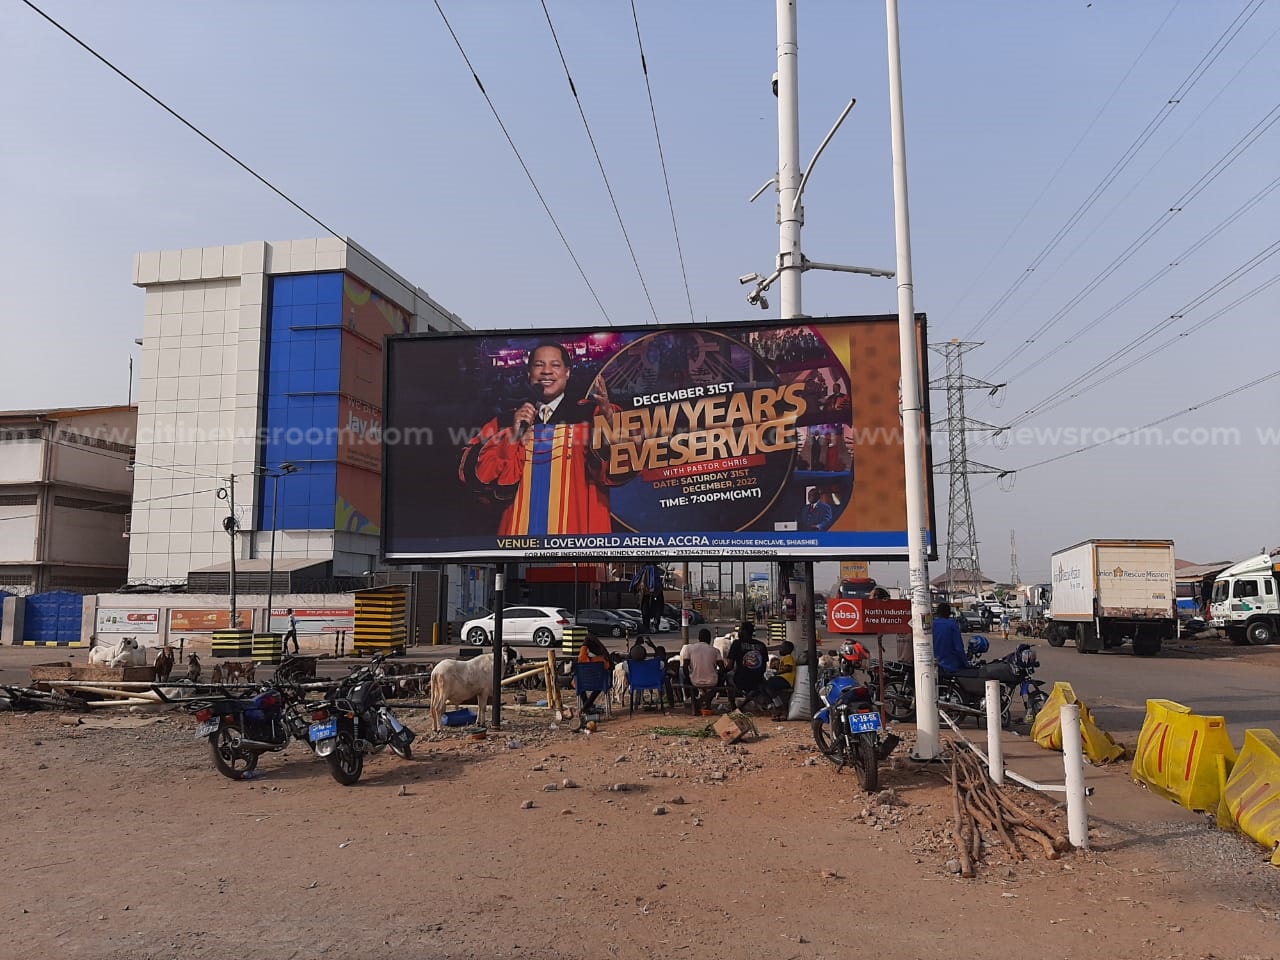 Churches mount giant billboards in town ahead of 2022 watch night services [Photos]